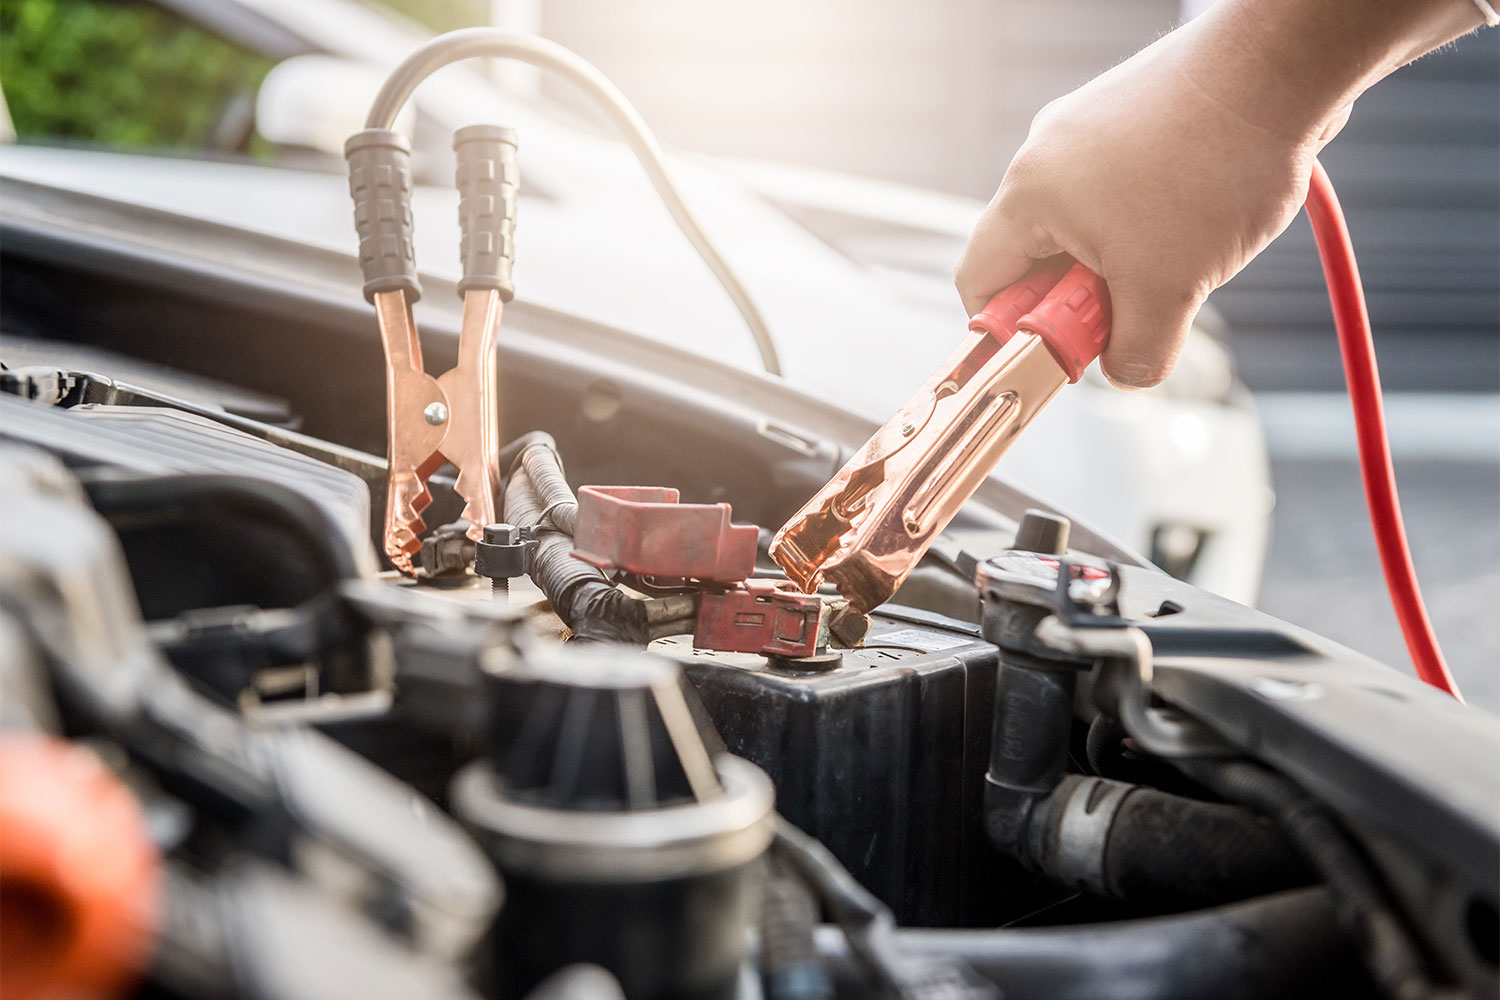 How to jump start a car in 9 steps